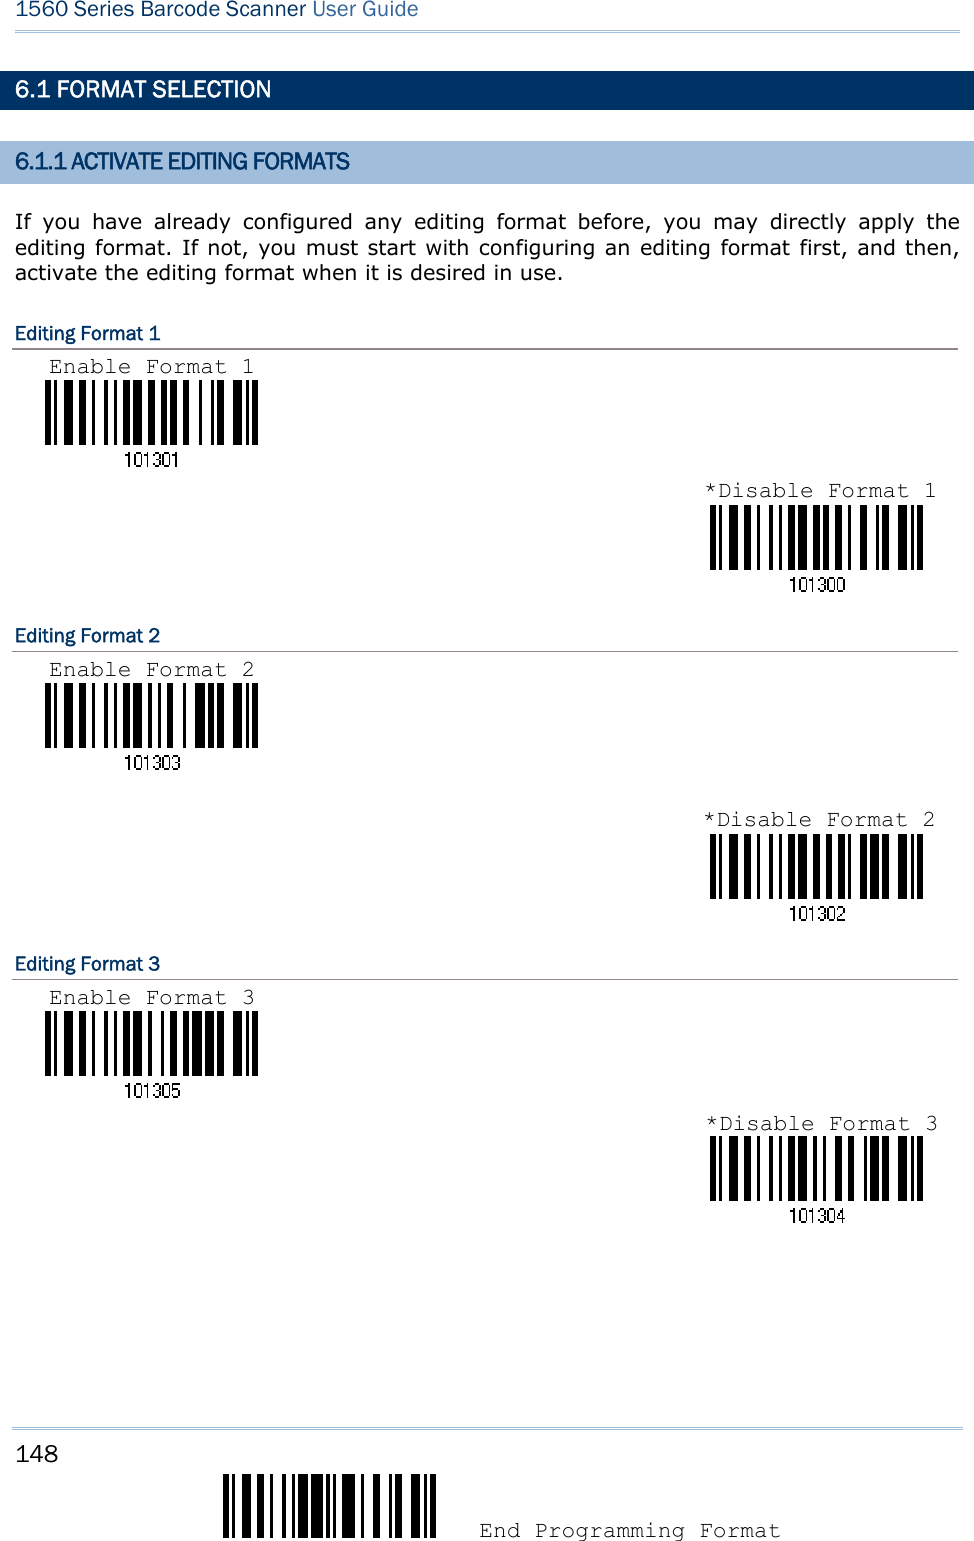 148  End Programming Format 1560 Series Barcode Scanner User Guide  6.1 FORMAT SELECTION 6.1.1 ACTIVATE EDITING FORMATS If you have already configured any editing format before, you may directly apply the editing format. If not, you must start with configuring an editing format first, and then, activate the editing format when it is desired in use. Editing Format 1                              Editing Format 2                               Editing Format 3                                   *Disable Format 1 Enable Format 1 *Disable Format 2Enable Format 2 *Disable Format 3Enable Format 3 